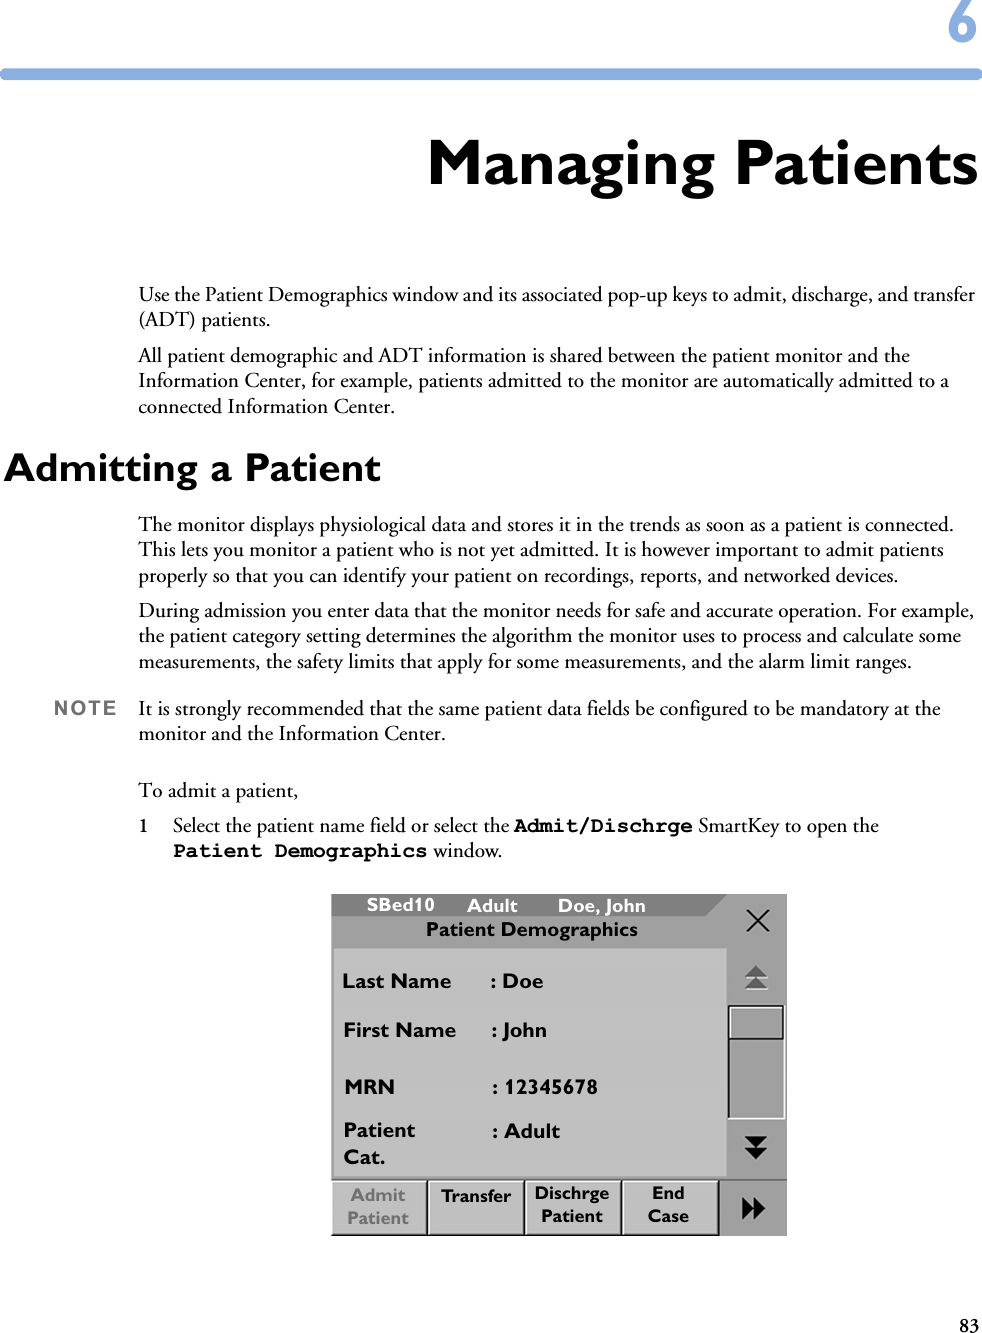 8366Managing PatientsUse the Patient Demographics window and its associated pop-up keys to admit, discharge, and transfer (ADT) patients. All patient demographic and ADT information is shared between the patient monitor and the Information Center, for example, patients admitted to the monitor are automatically admitted to a connected Information Center.Admitting a PatientThe monitor displays physiological data and stores it in the trends as soon as a patient is connected. This lets you monitor a patient who is not yet admitted. It is however important to admit patients properly so that you can identify your patient on recordings, reports, and networked devices. During admission you enter data that the monitor needs for safe and accurate operation. For example, the patient category setting determines the algorithm the monitor uses to process and calculate some measurements, the safety limits that apply for some measurements, and the alarm limit ranges.NOTE It is strongly recommended that the same patient data fields be configured to be mandatory at the monitor and the Information Center. To admit a patient,1Select the patient name field or select the Admit/Dischrge SmartKey to open the Patient Demographics window.AdultSBed10 Doe, JohnPatient DemographicsLast Name : DoeFirst Name : JohnMRN : 12345678Patient Cat.Tr a n s f e r: AdultDischrge PatientEndCaseAdmit Patient